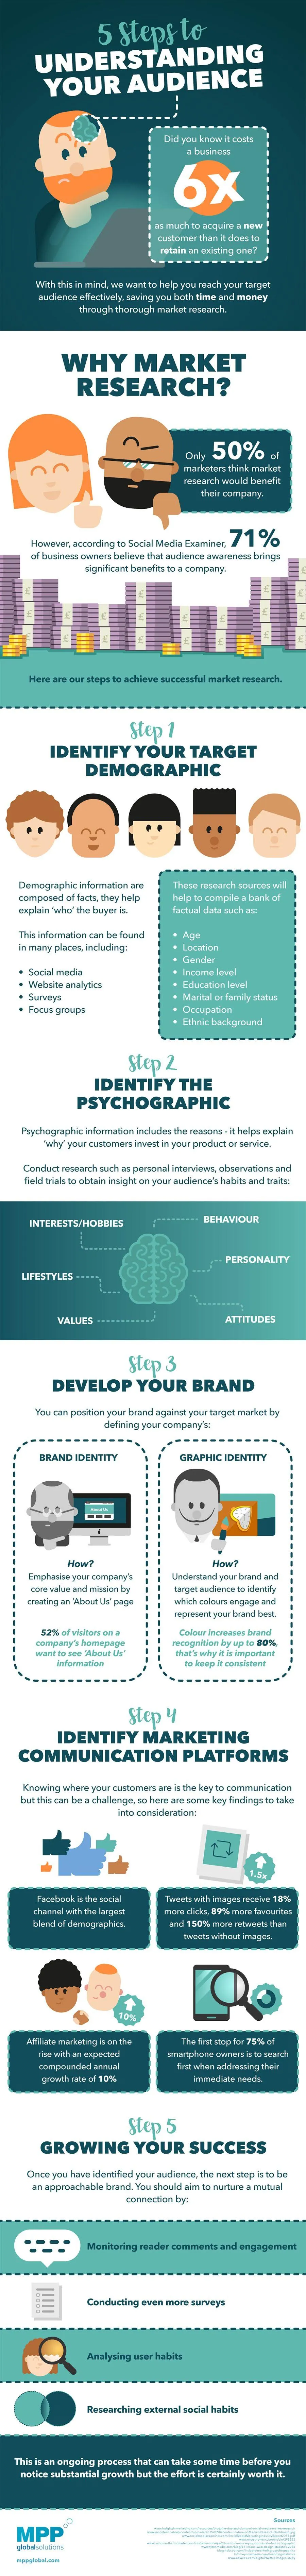 5 Steps to Understanding Your Audience - infographic